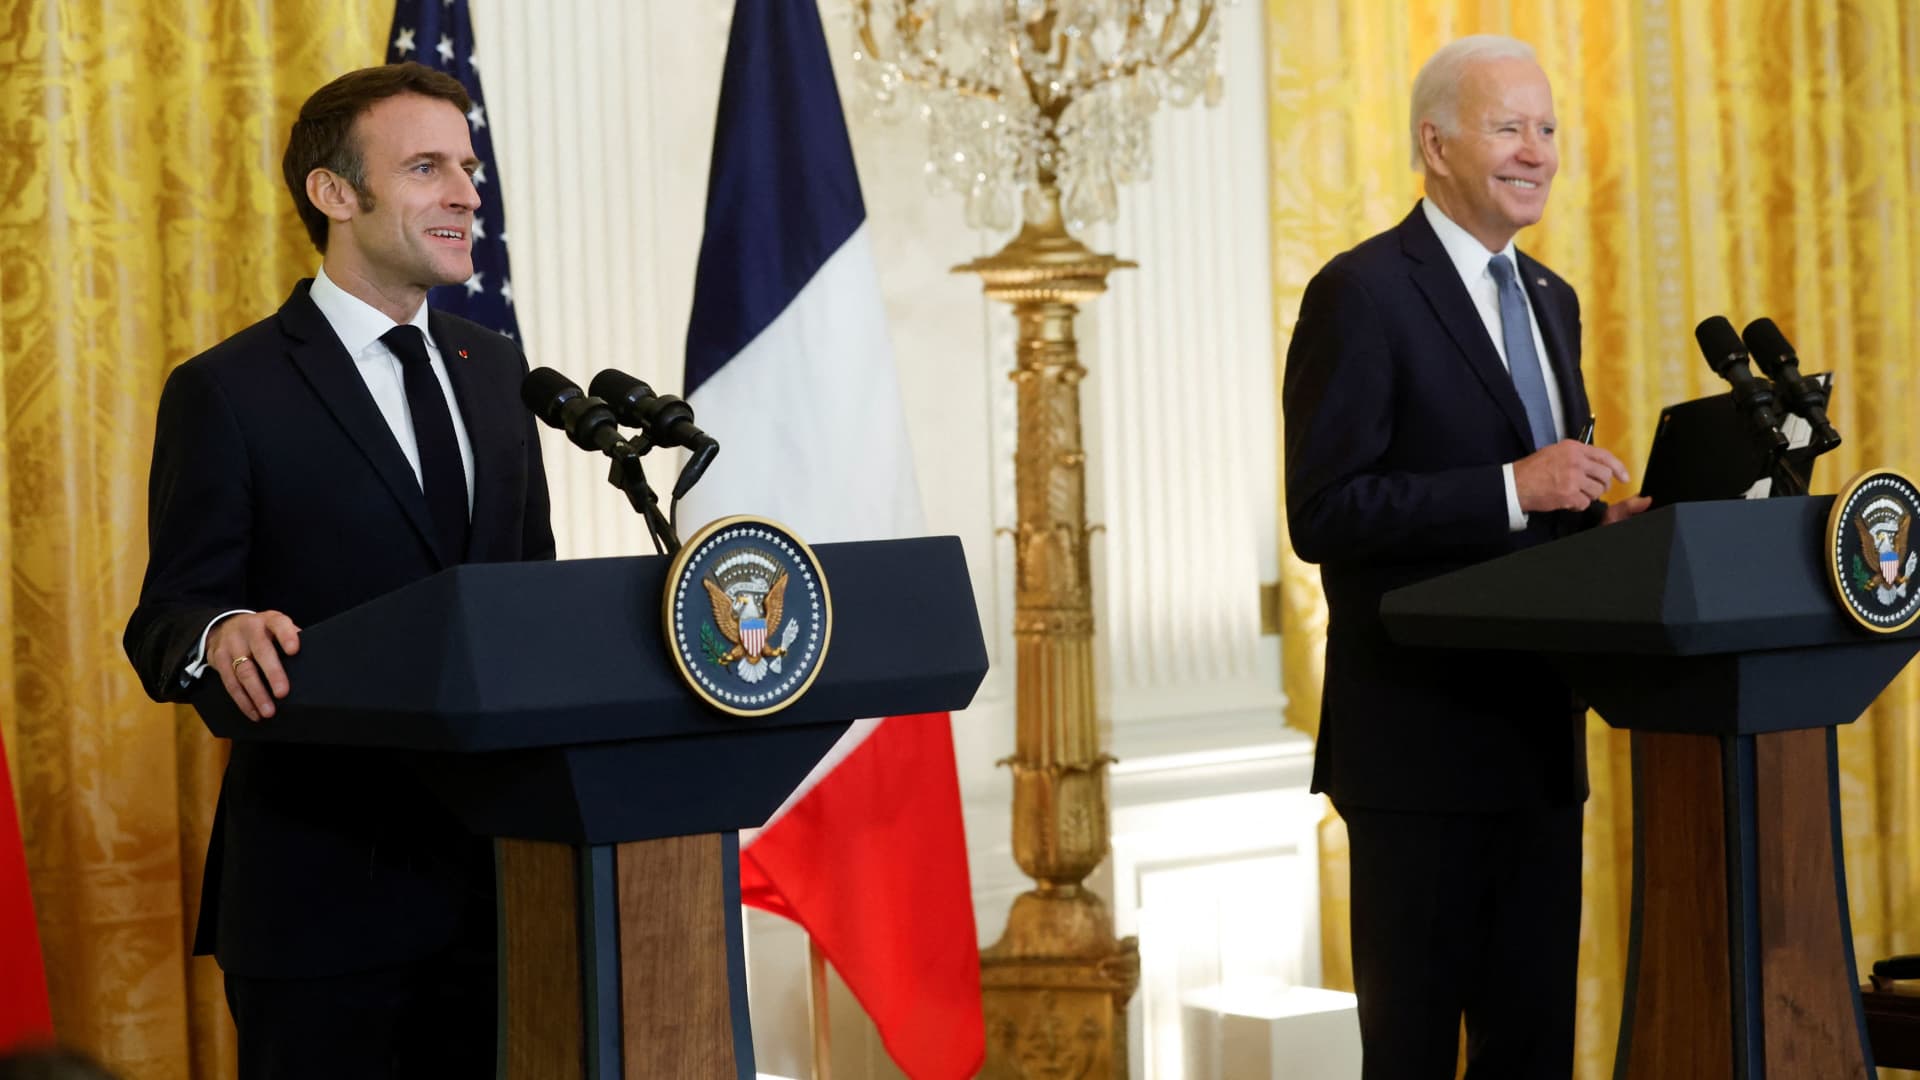 Biden, Macron reaffirm their partnership, support for Ukraine at joint White House press conference